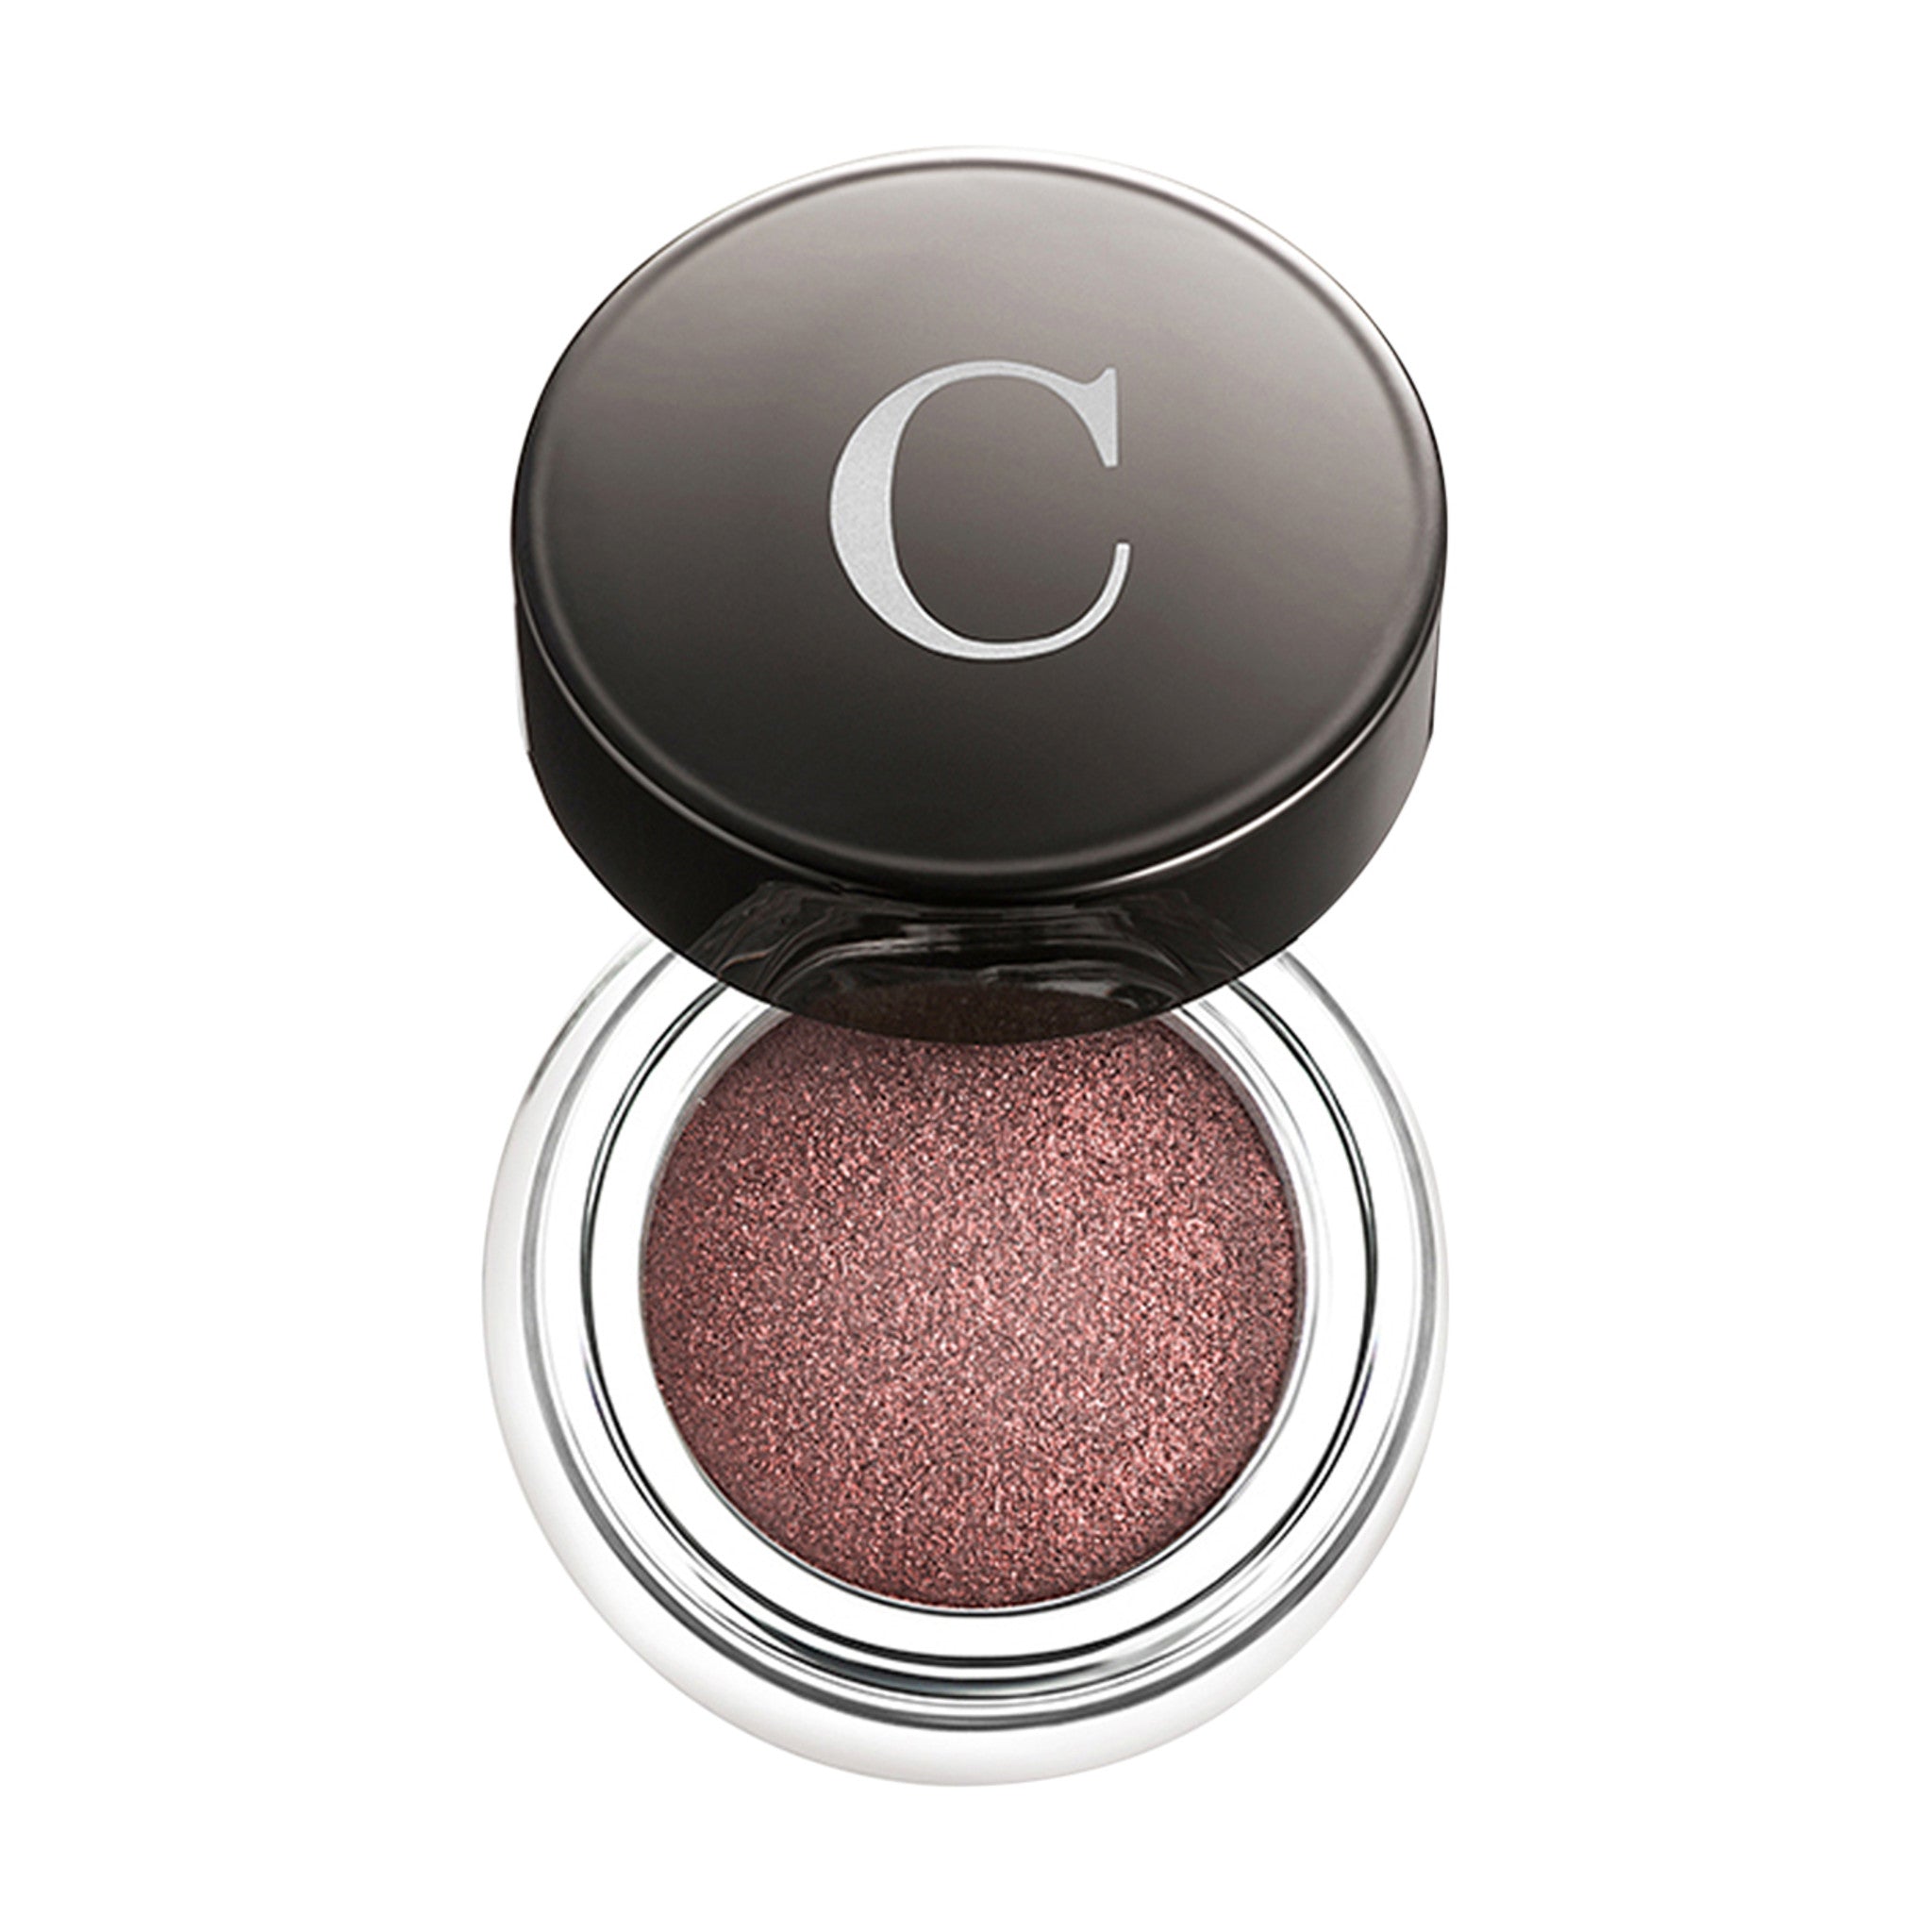 Chantecaille Mermaid Eye Color Color/Shade variant: Starfish main image. This product is in the color pink